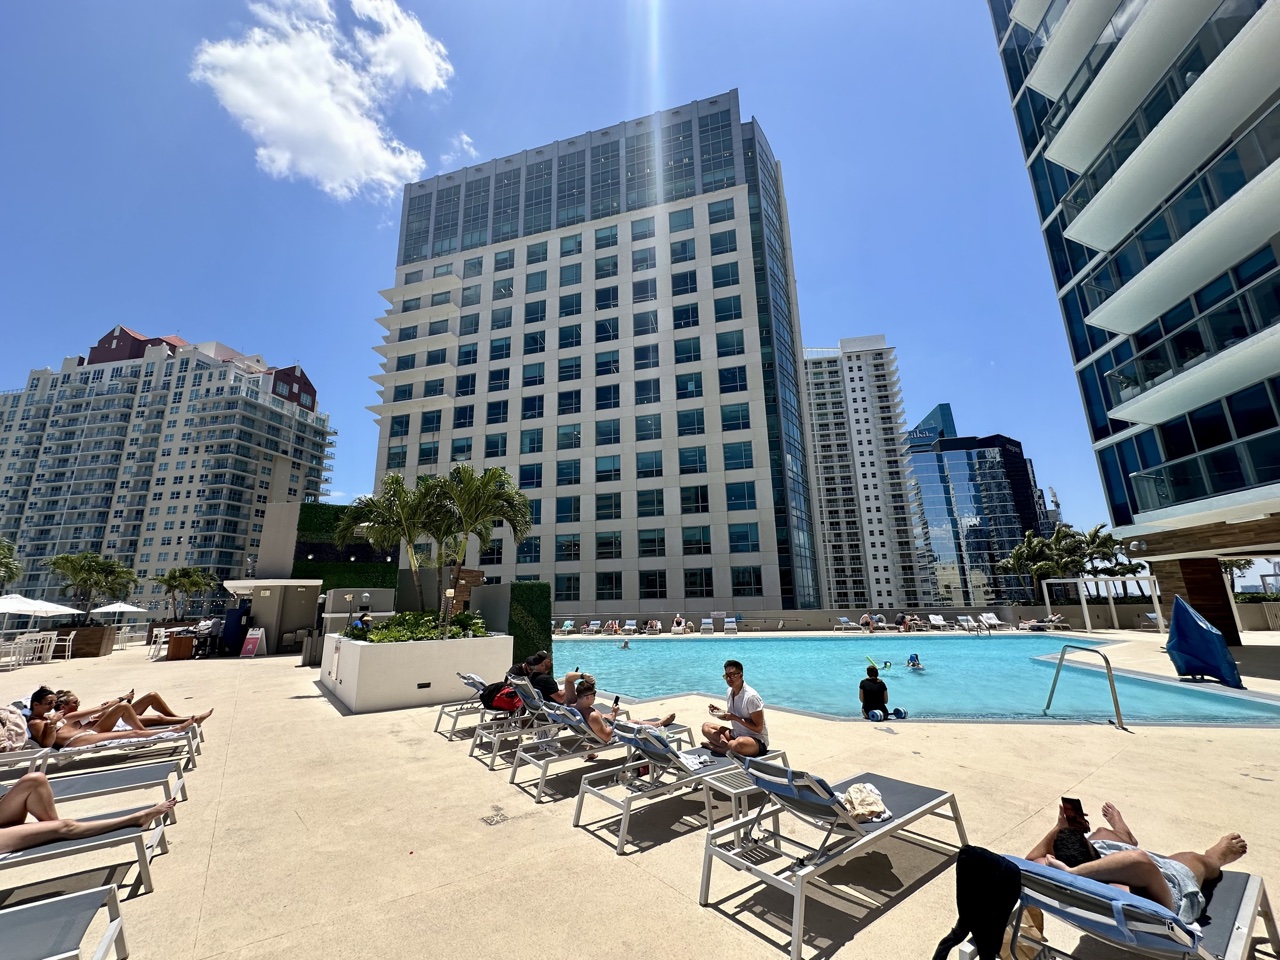 Hyatt Centric Brickell Miami pool with people